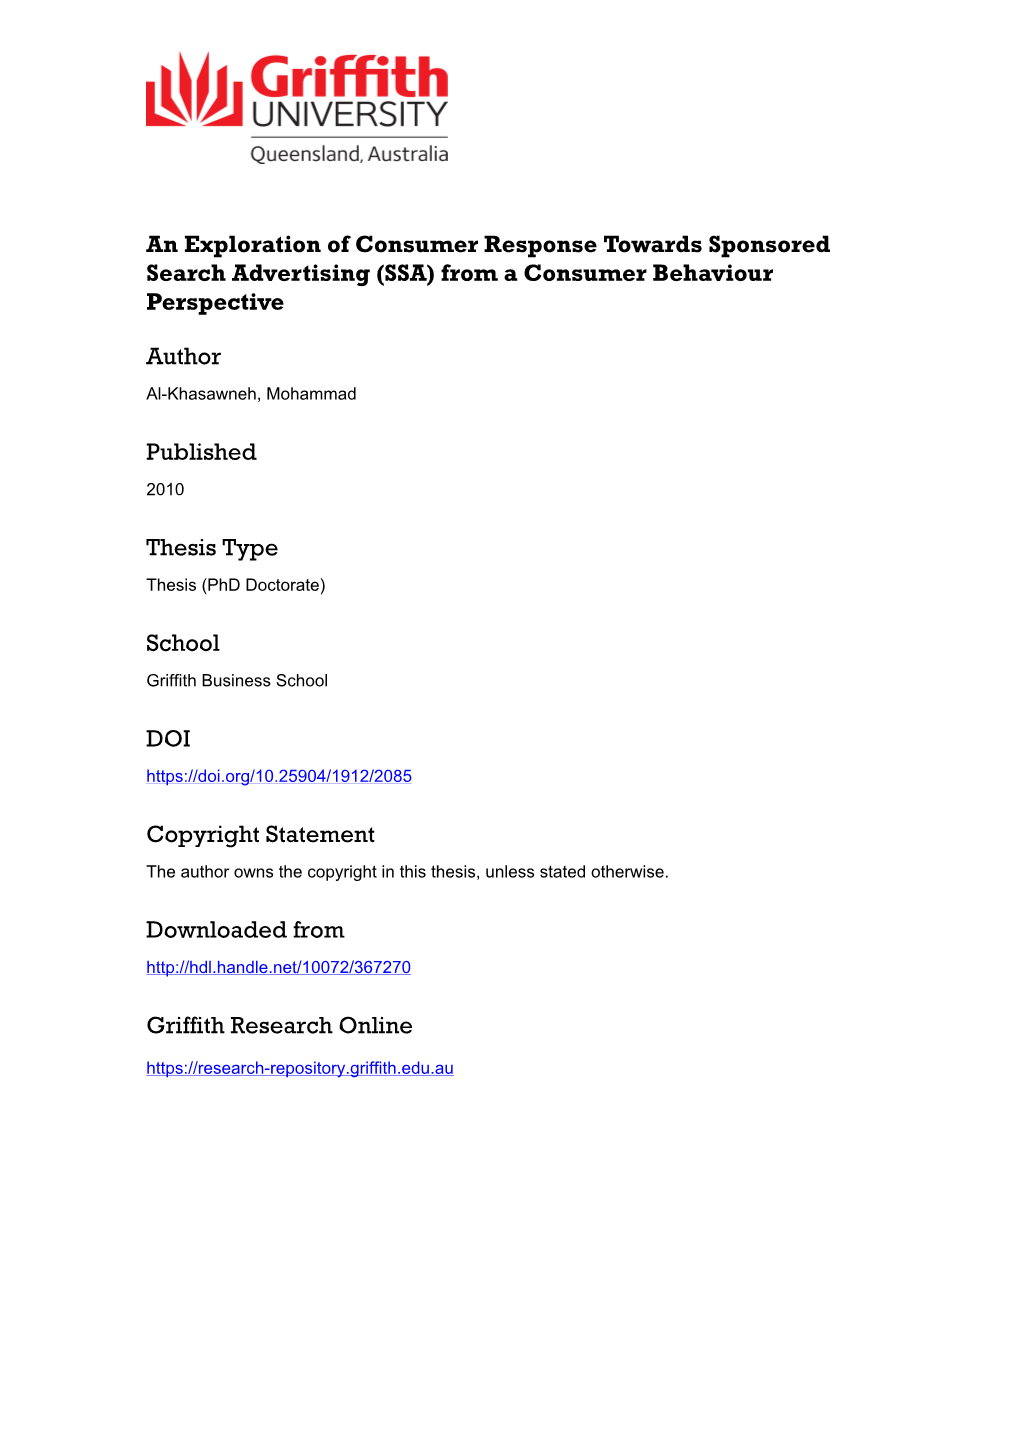 An Exploration of Consumer Response Towards Sponsored Search Advertising (SSA) from a Consumer Behaviour Perspective